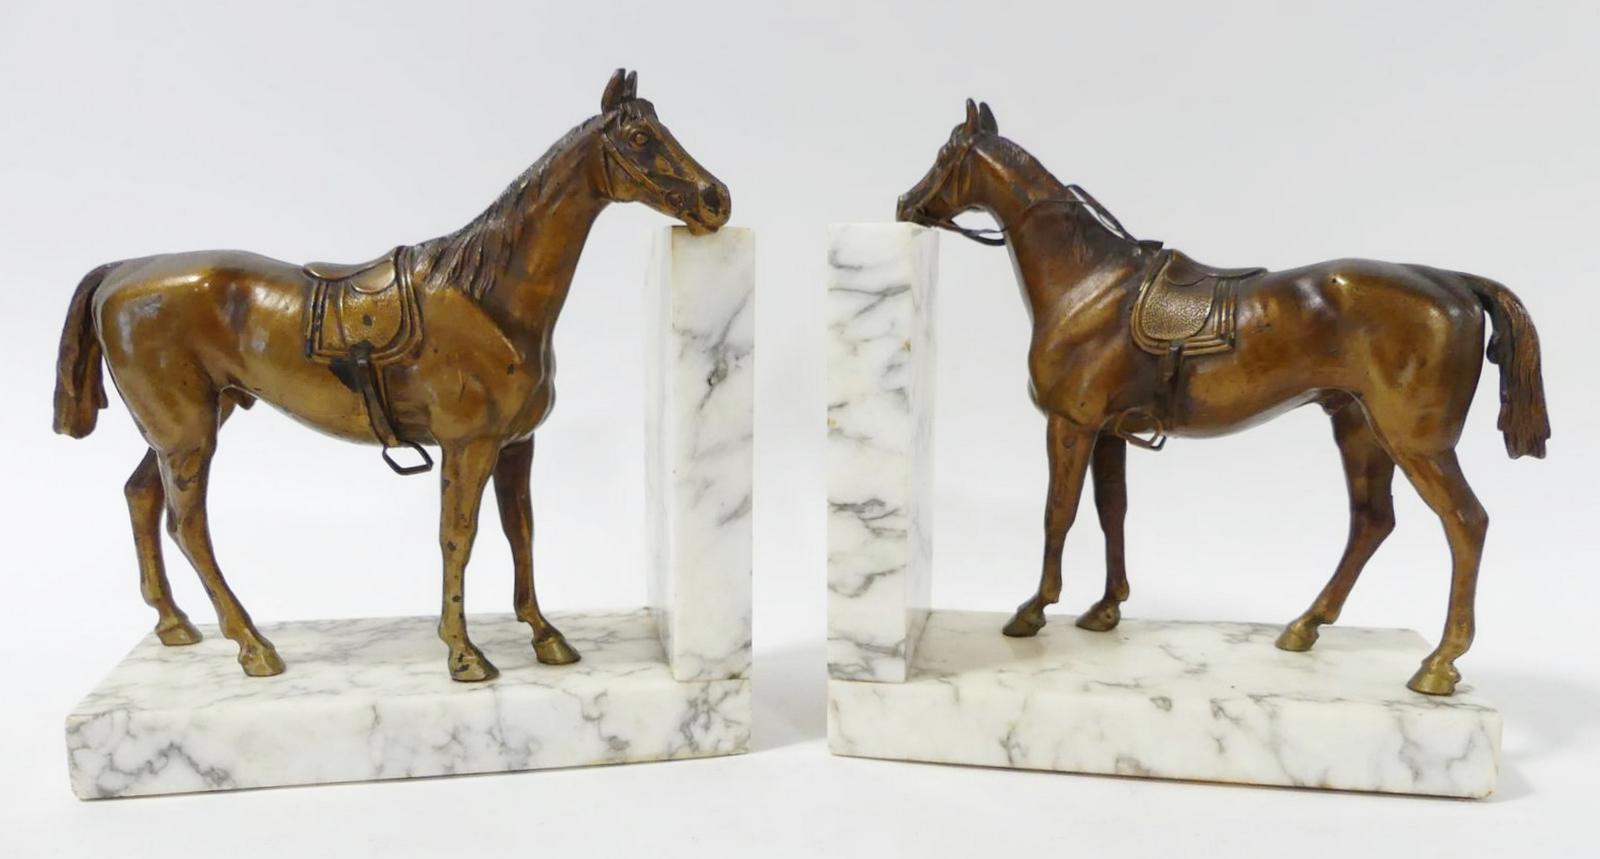 PAIR OF "HORSE" BOOKENDS